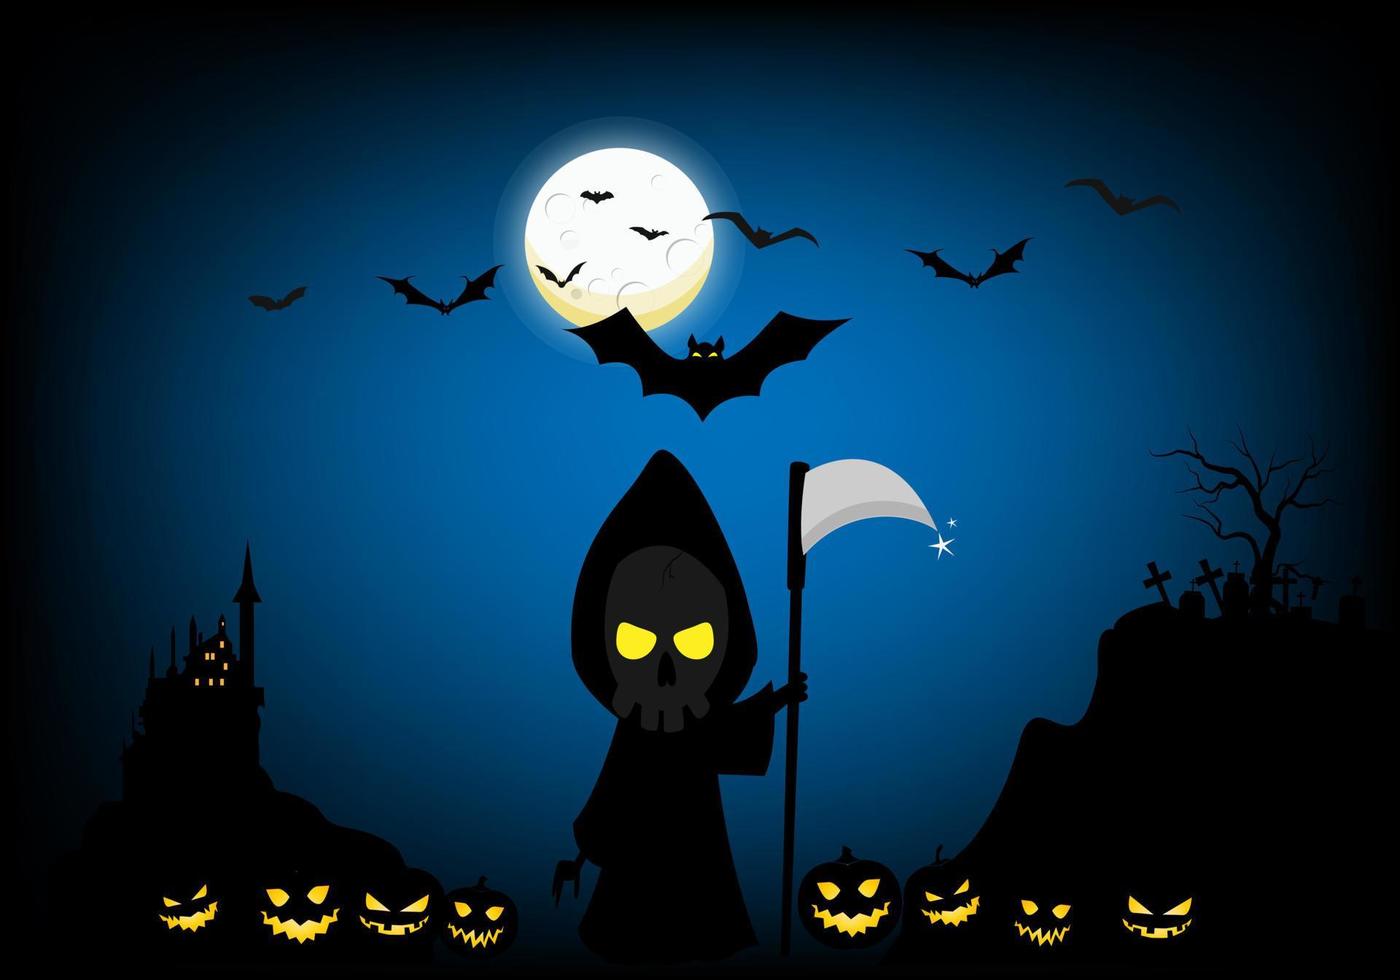 Soul Hunters come out on Halloween night. Along with pumpkins, ghosts, bats on the night of the full moon. vector